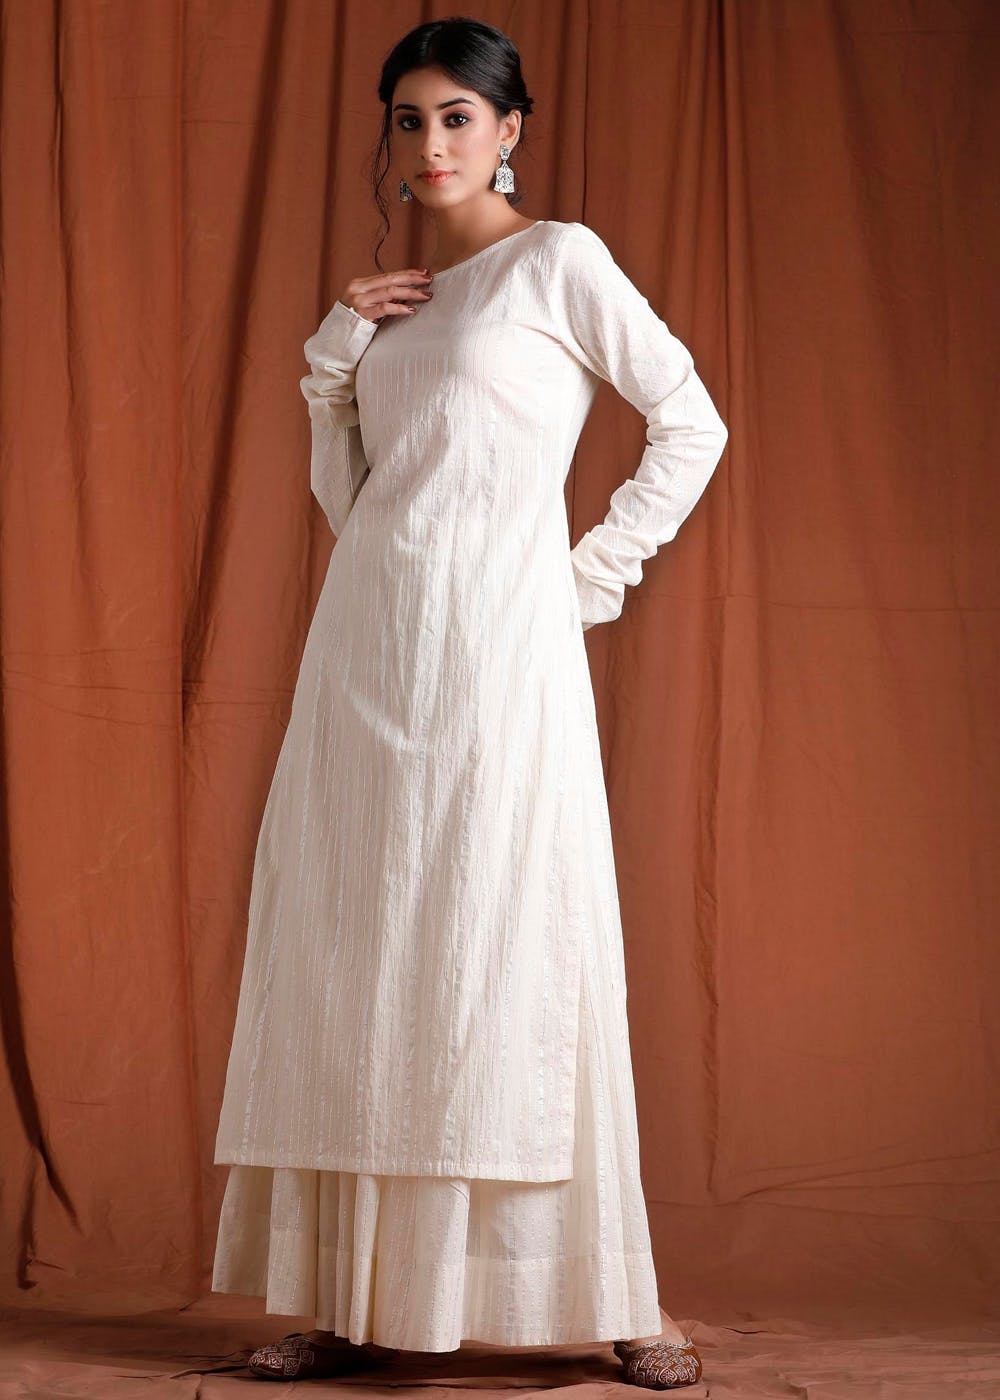 LASTINCH All Sizes Solid White Kurti with three fourth Sleeves